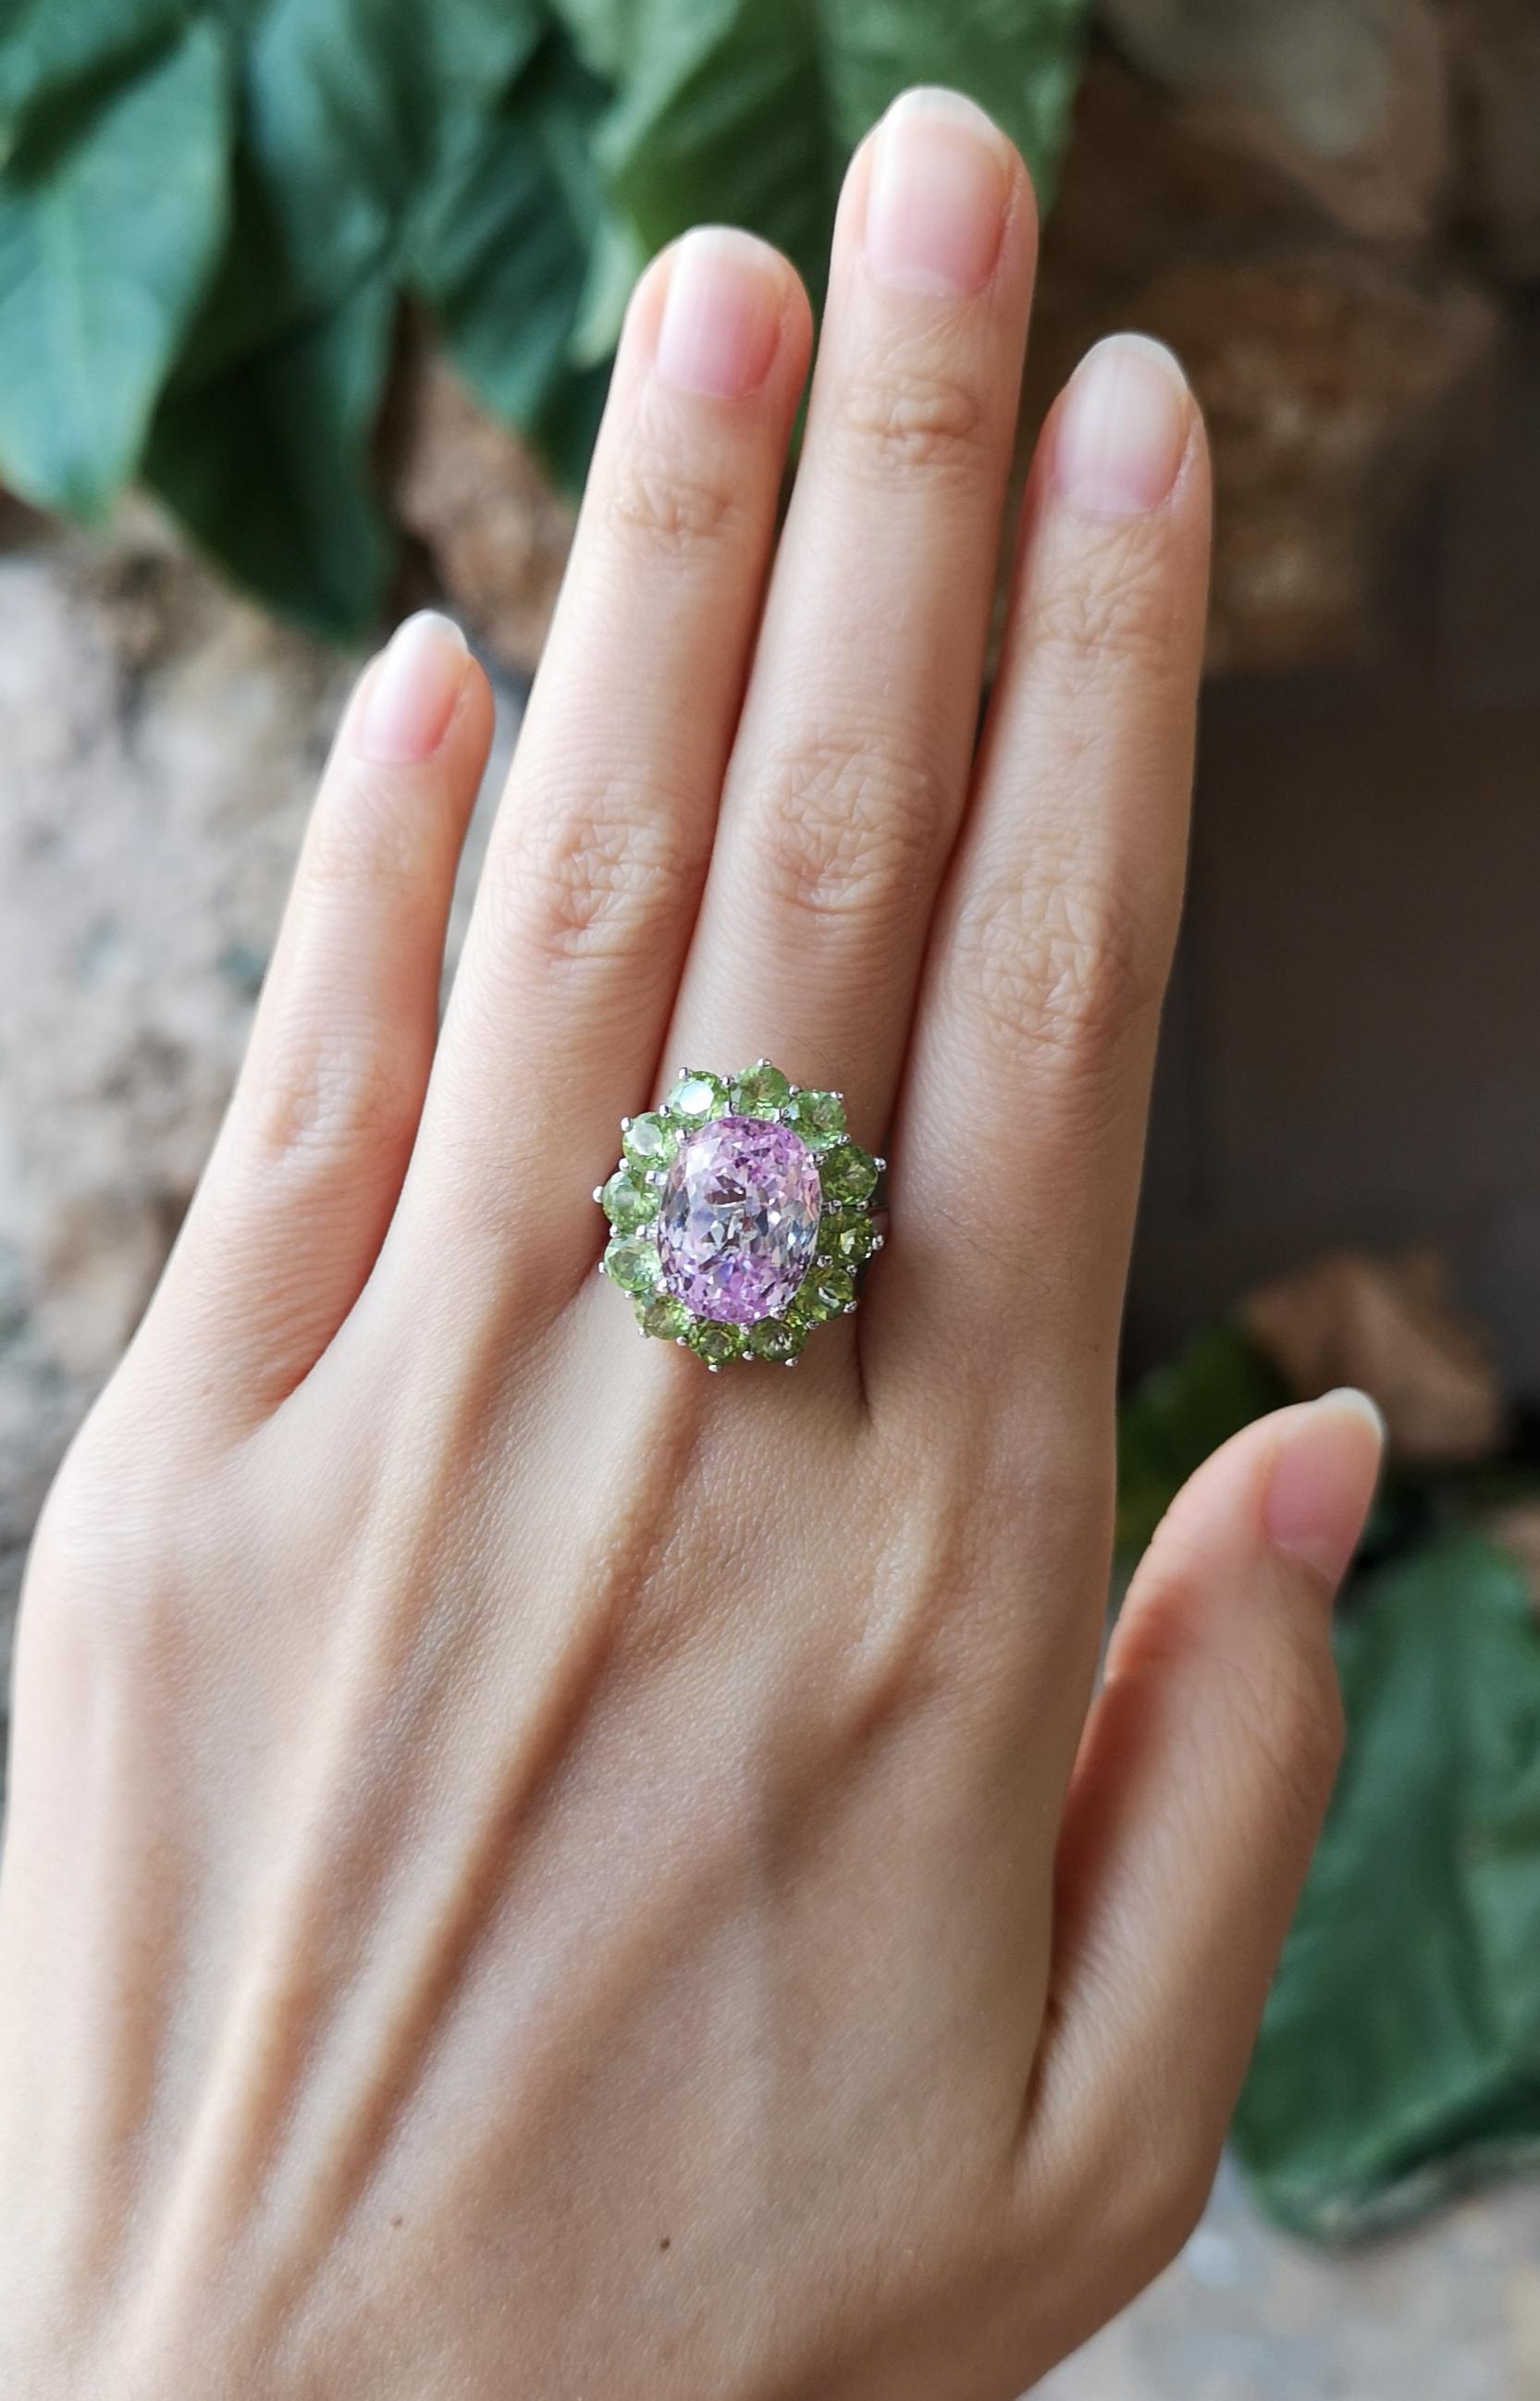 Kunzite 8.80 carats with Peridot 3.40 carats Ring set in 18 Karat White Gold Settings

Width:  1.7 cm 
Length: 2.1  cm
Ring Size: 54
Total Weight: 11.23 grams



